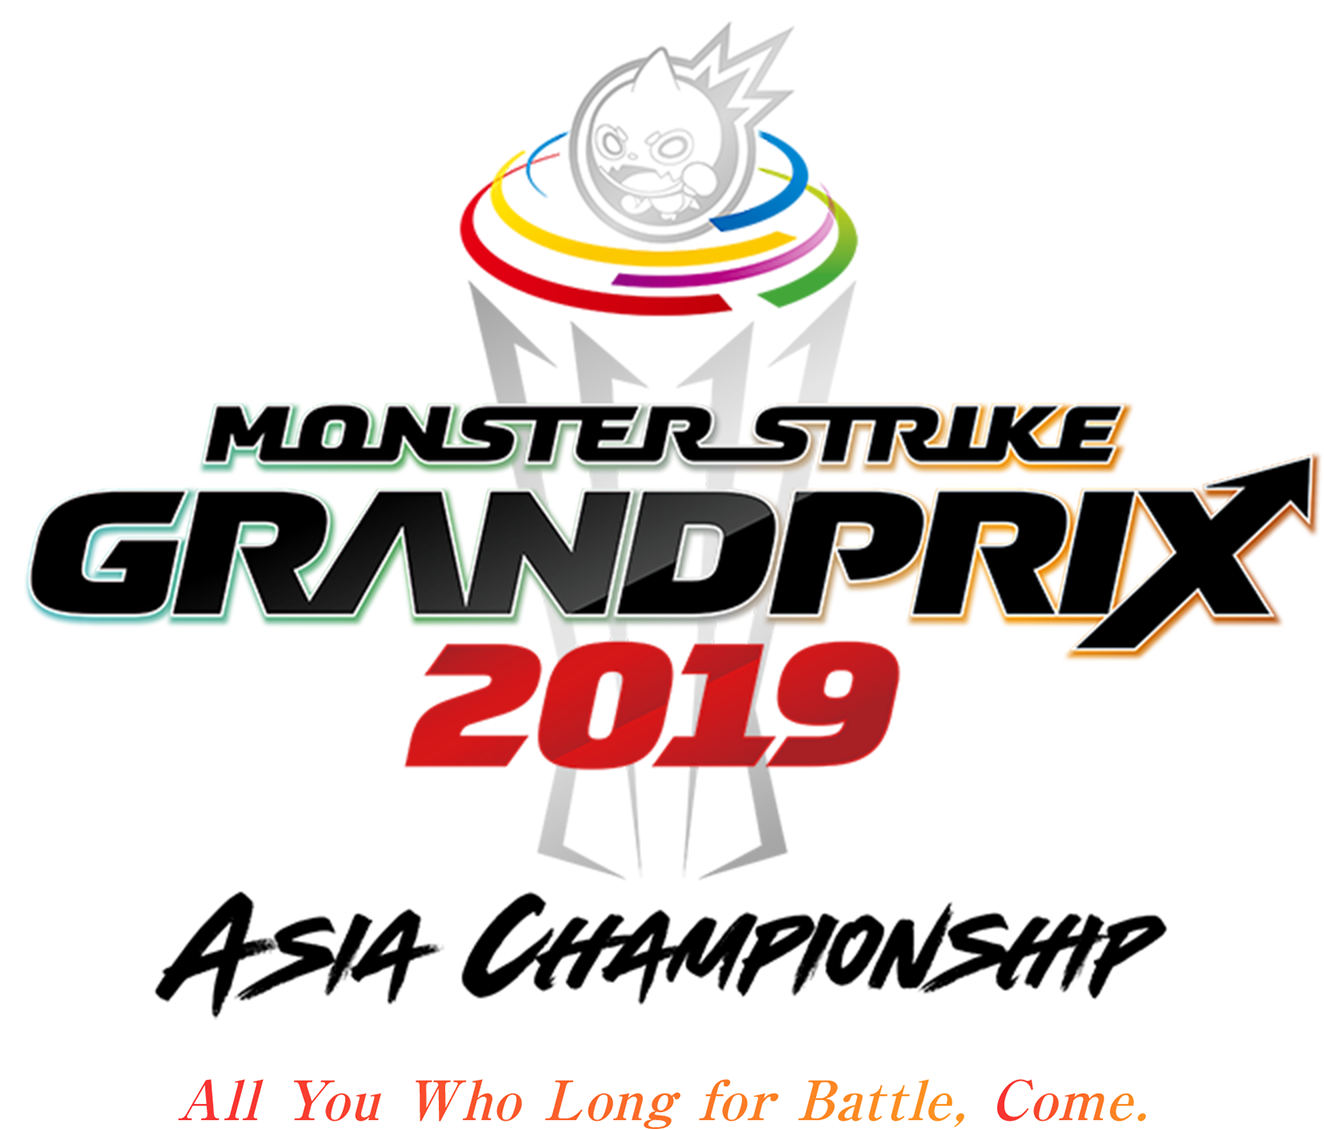 MONSTER STRIKE GRANDPRIX 2019 ASIA CHAMPIONSHIP - All You Who Ling for Battle, Come.